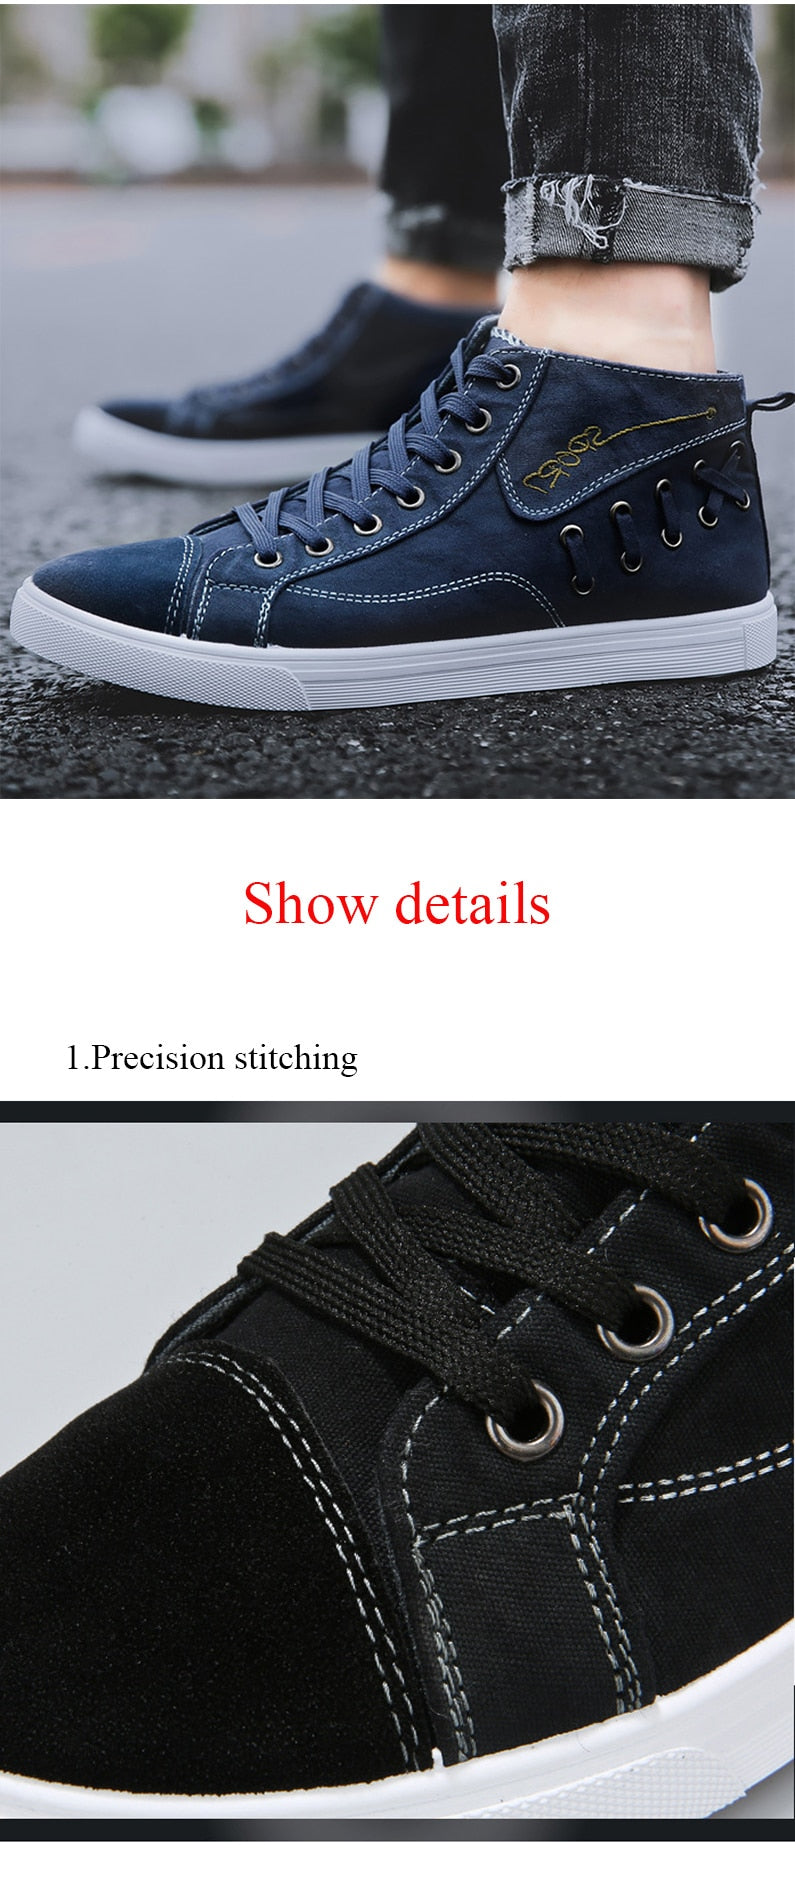 Casual Blue Canvas Vulcanized Shoes Male High Top Sneakers The Clothing Company Sydney